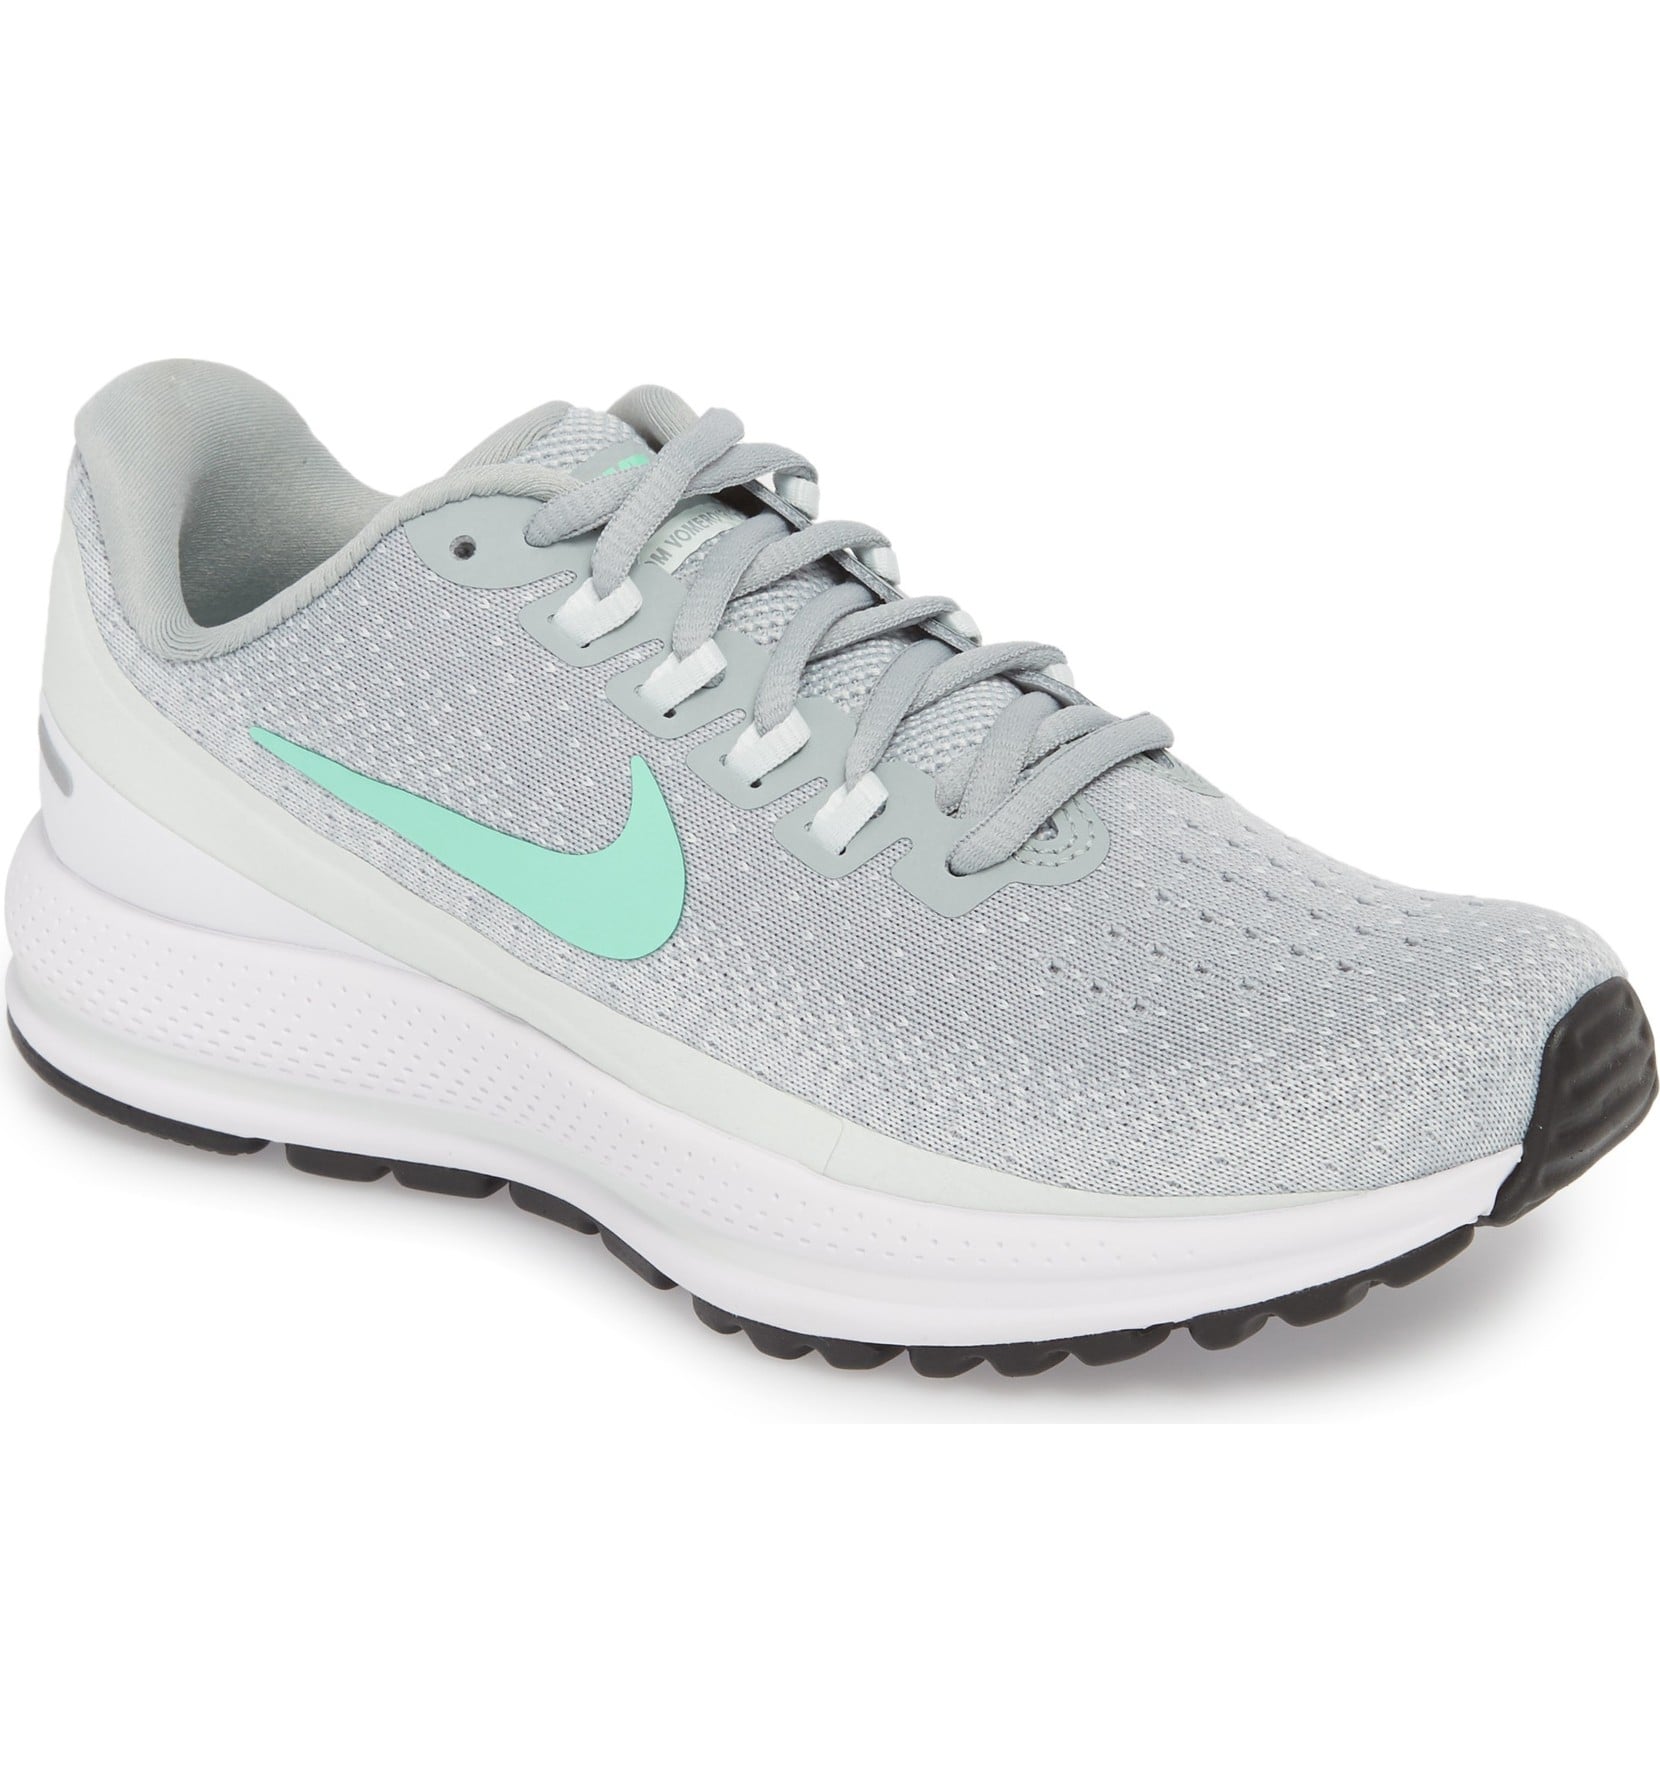 Soldado deberes níquel Nike Air Zoom Vomero 13 Running Shoe | Run, Don't Walk — These Are the Best  Running Shoes of 2018, All at Nordstrom! | POPSUGAR Fitness Photo 8